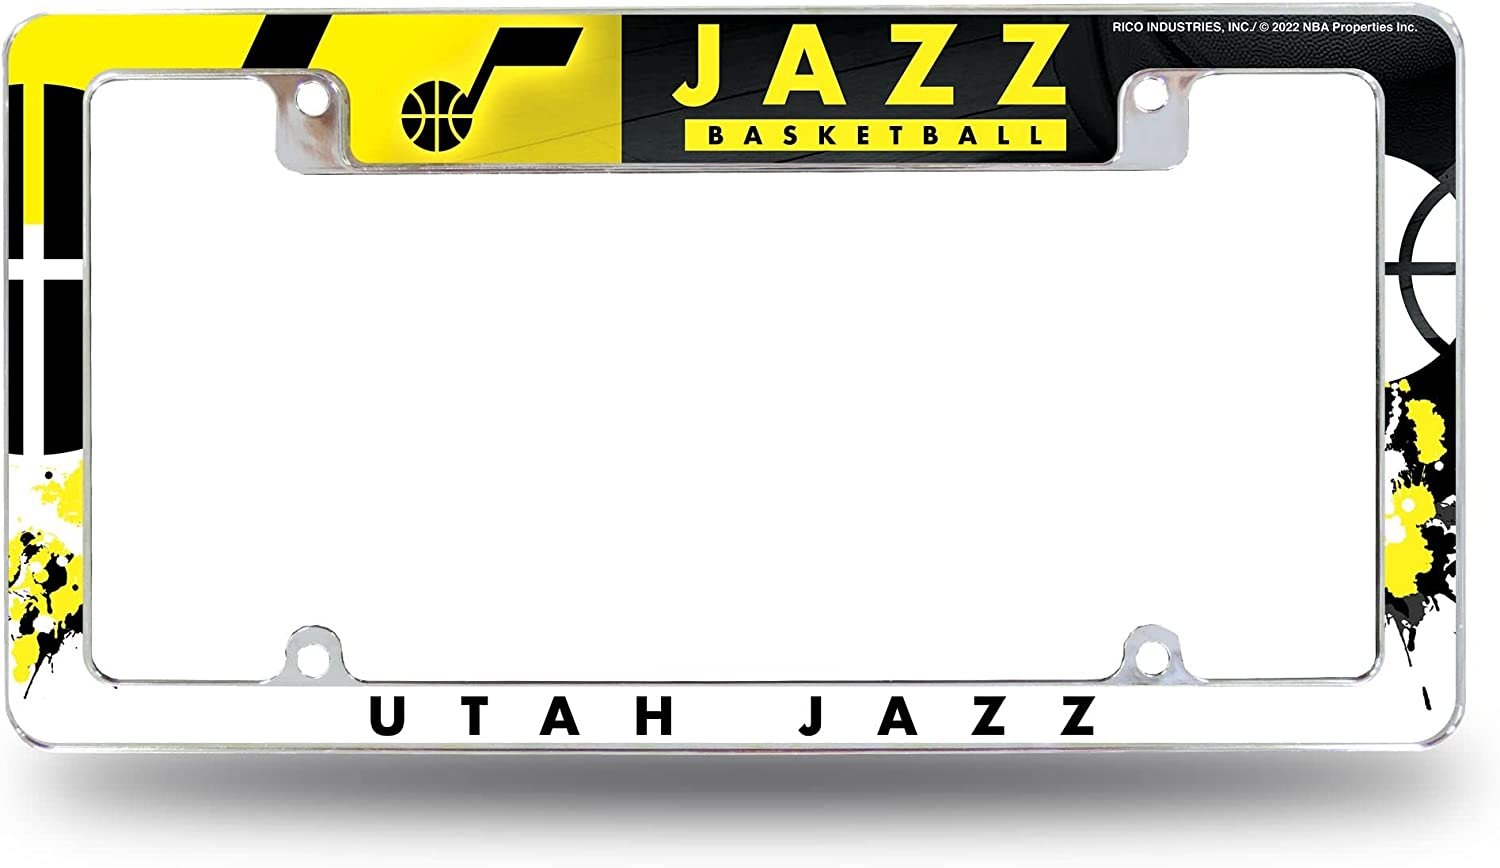 Utah Jazz Metal License Plate Frame Chrome Tag Cover All Over Design 6x12 Inch